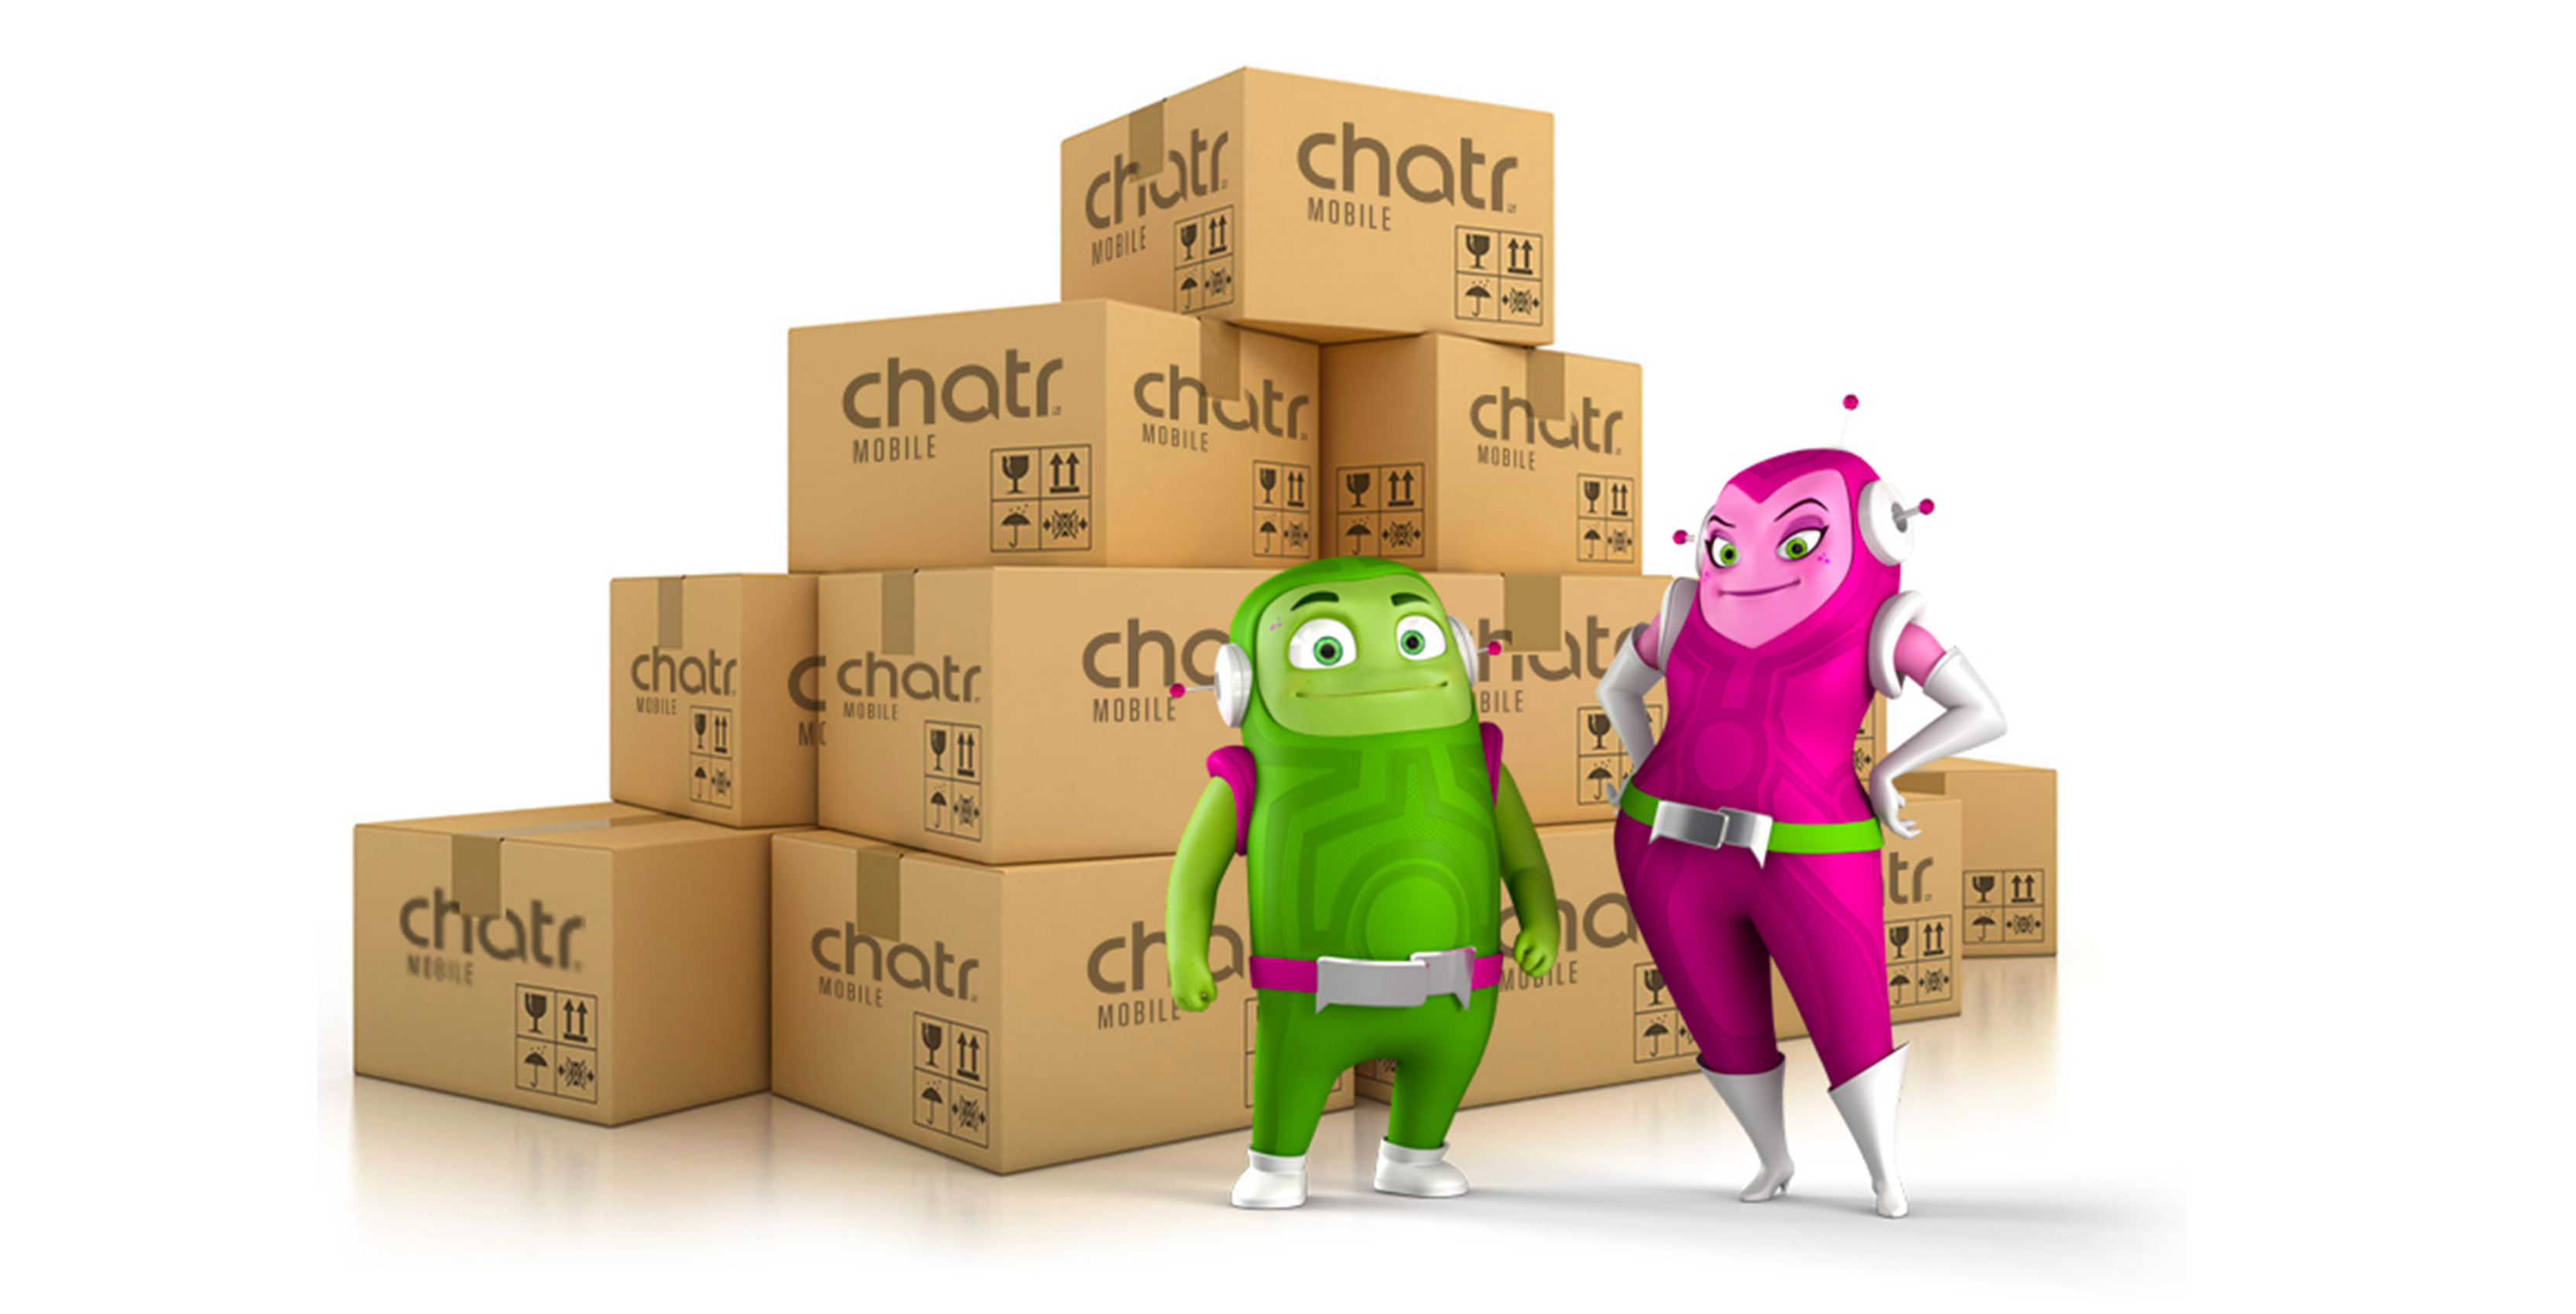 chatr mobilicity